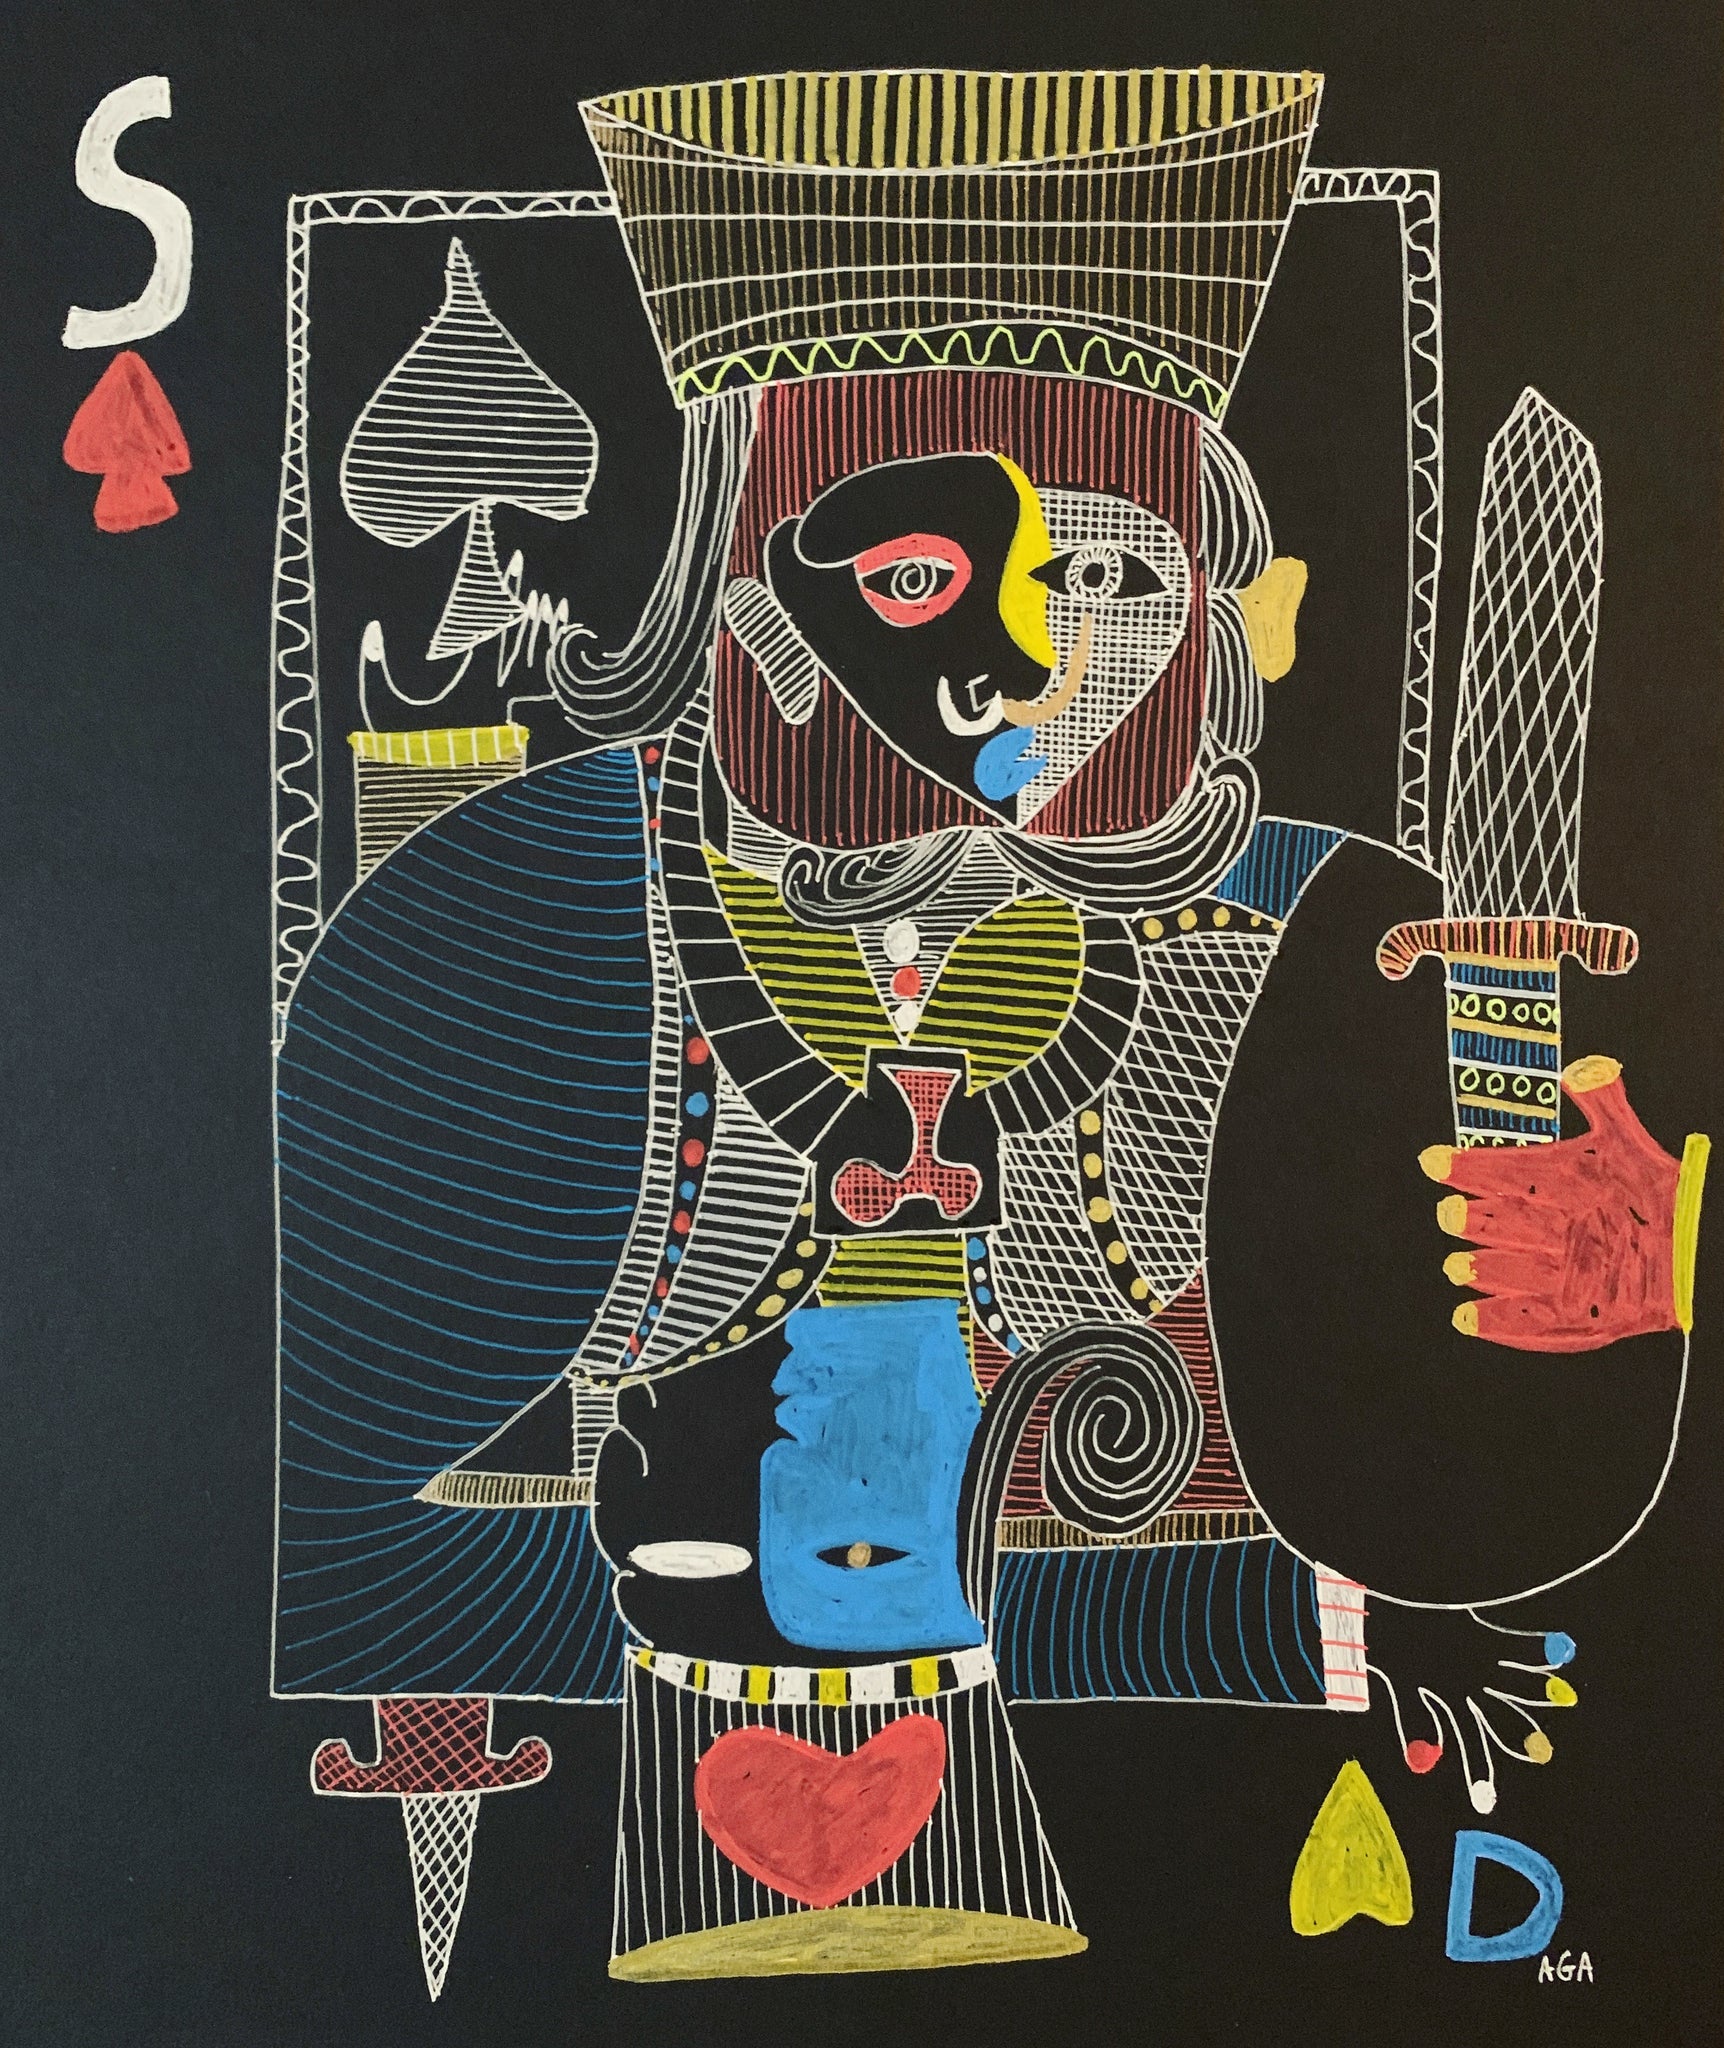 David And Saul Play Pinochle by AGA - Pen And Acrylic Marker On Paper - 11x14 Inches.